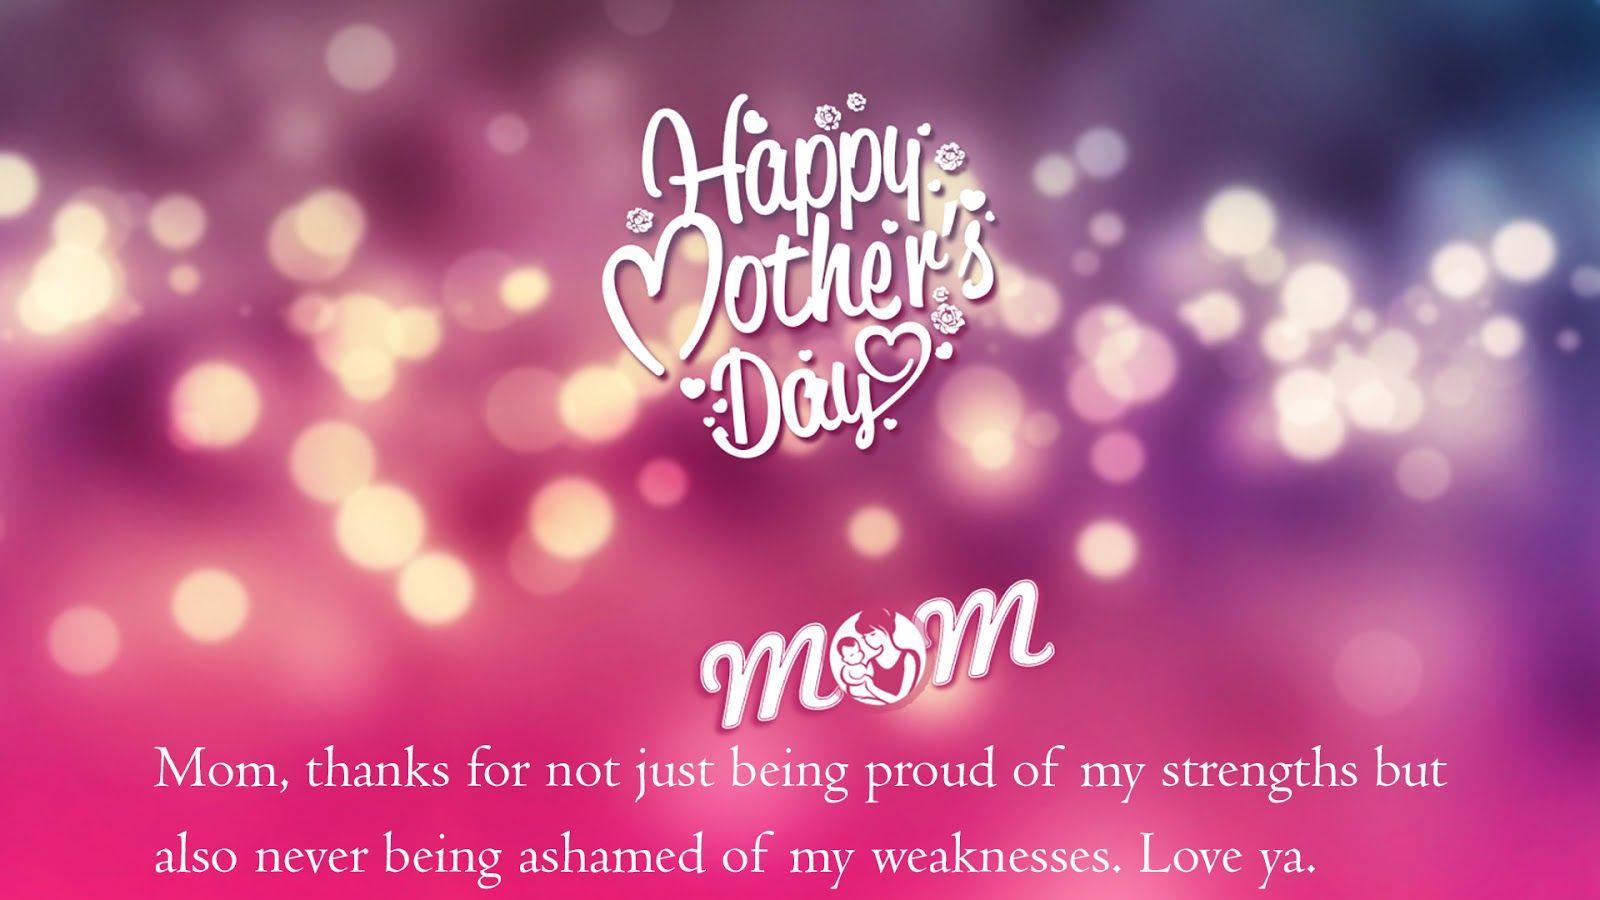 13th Of May Unique Mother's Day 2018 Wishes Message Poems Image